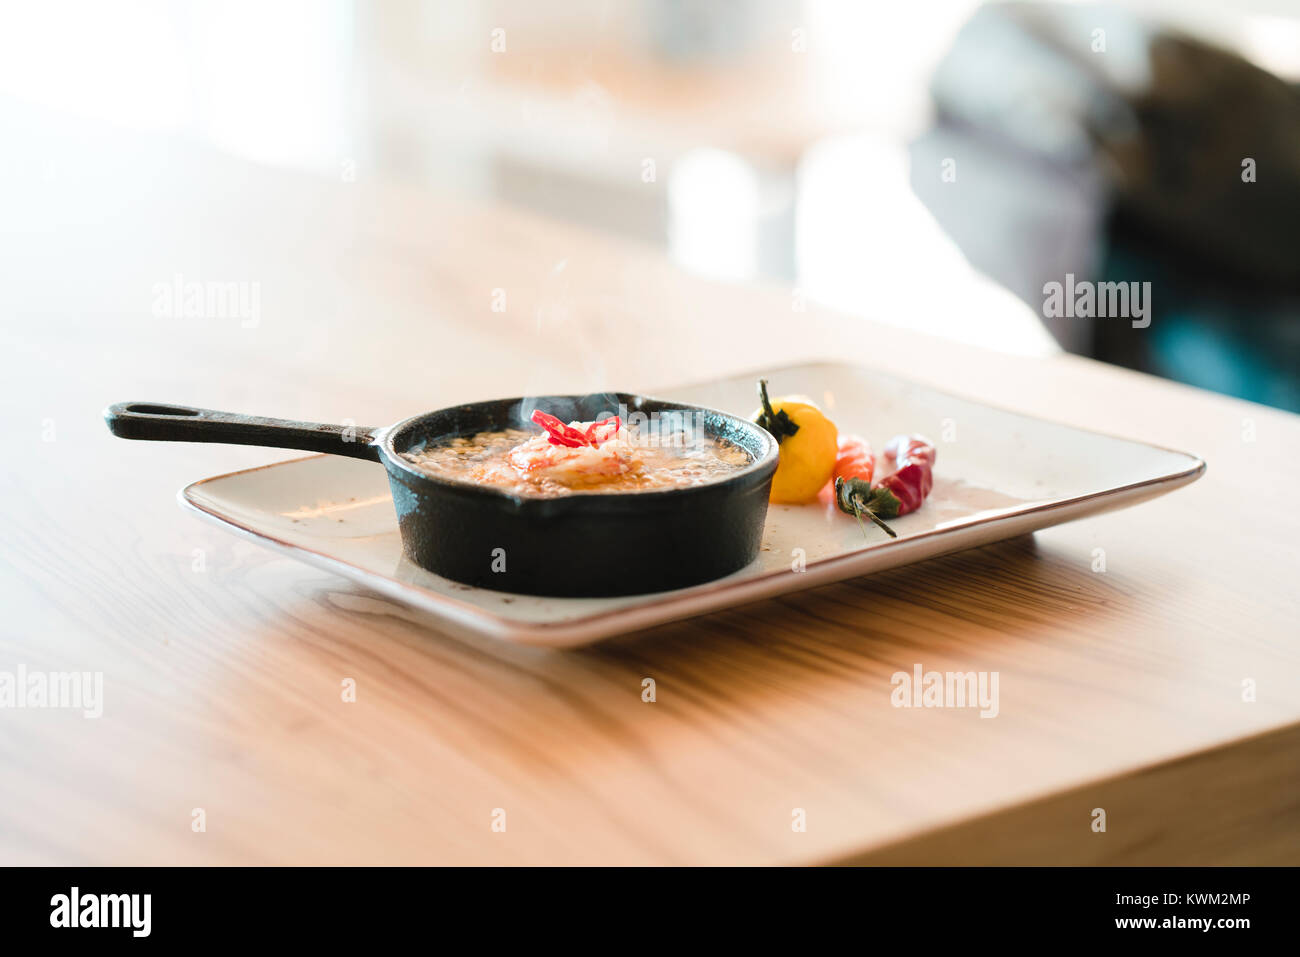 Close-up of hot food in skillet on table Stock Photo